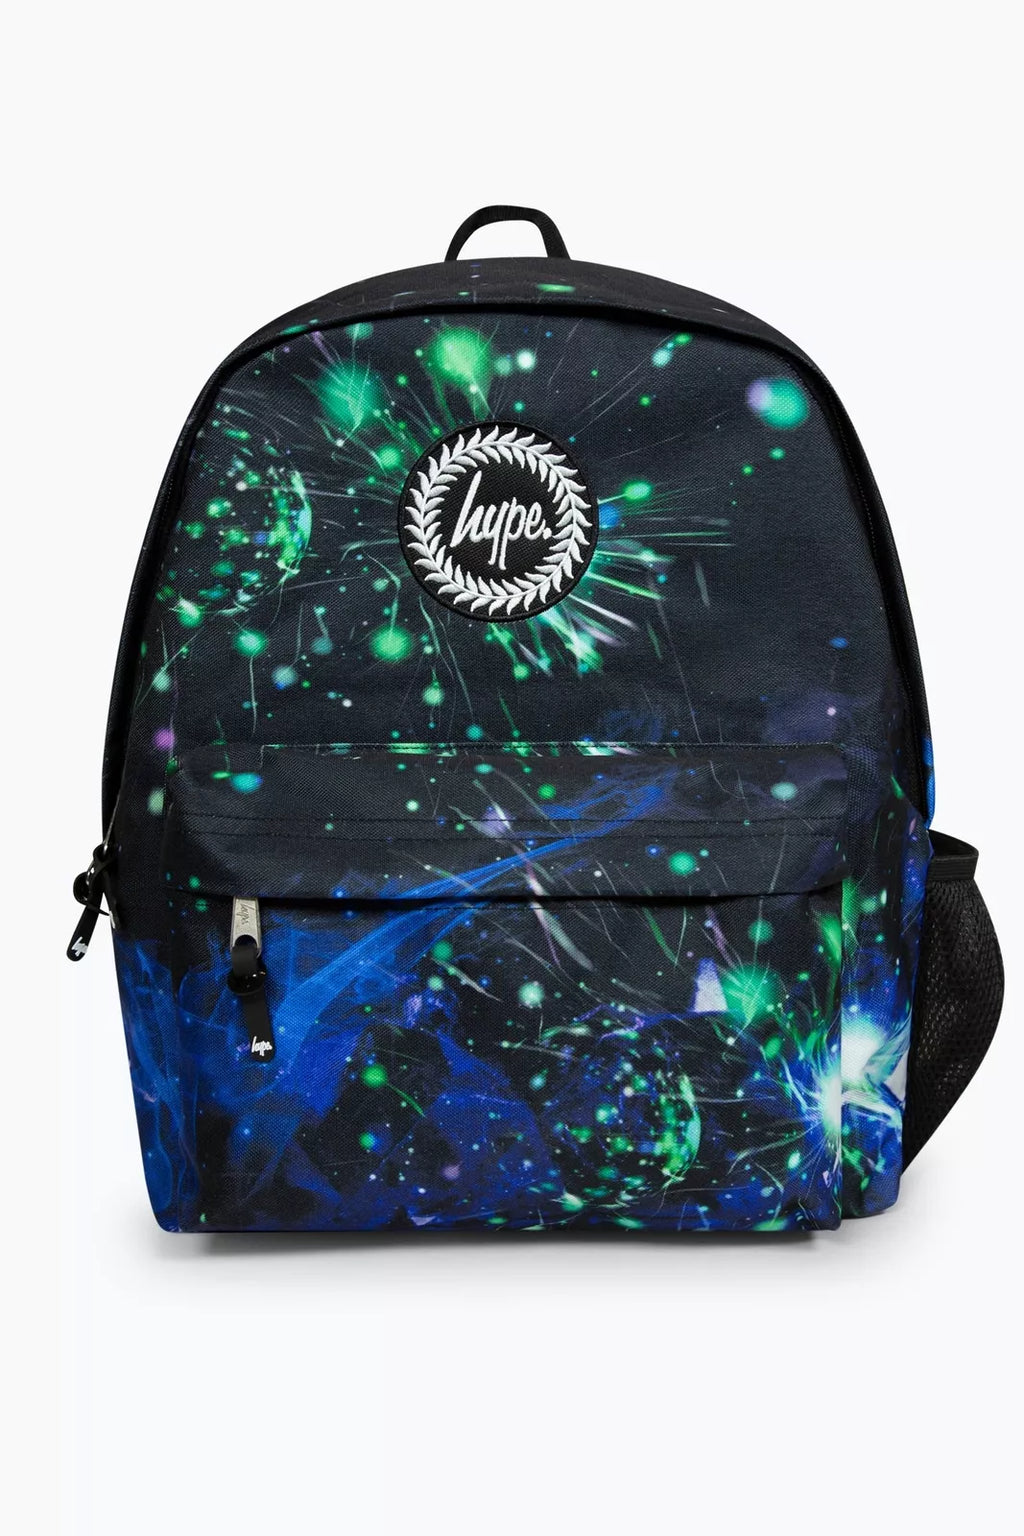 Hype Boys Black Cosmos Iconic Backpack